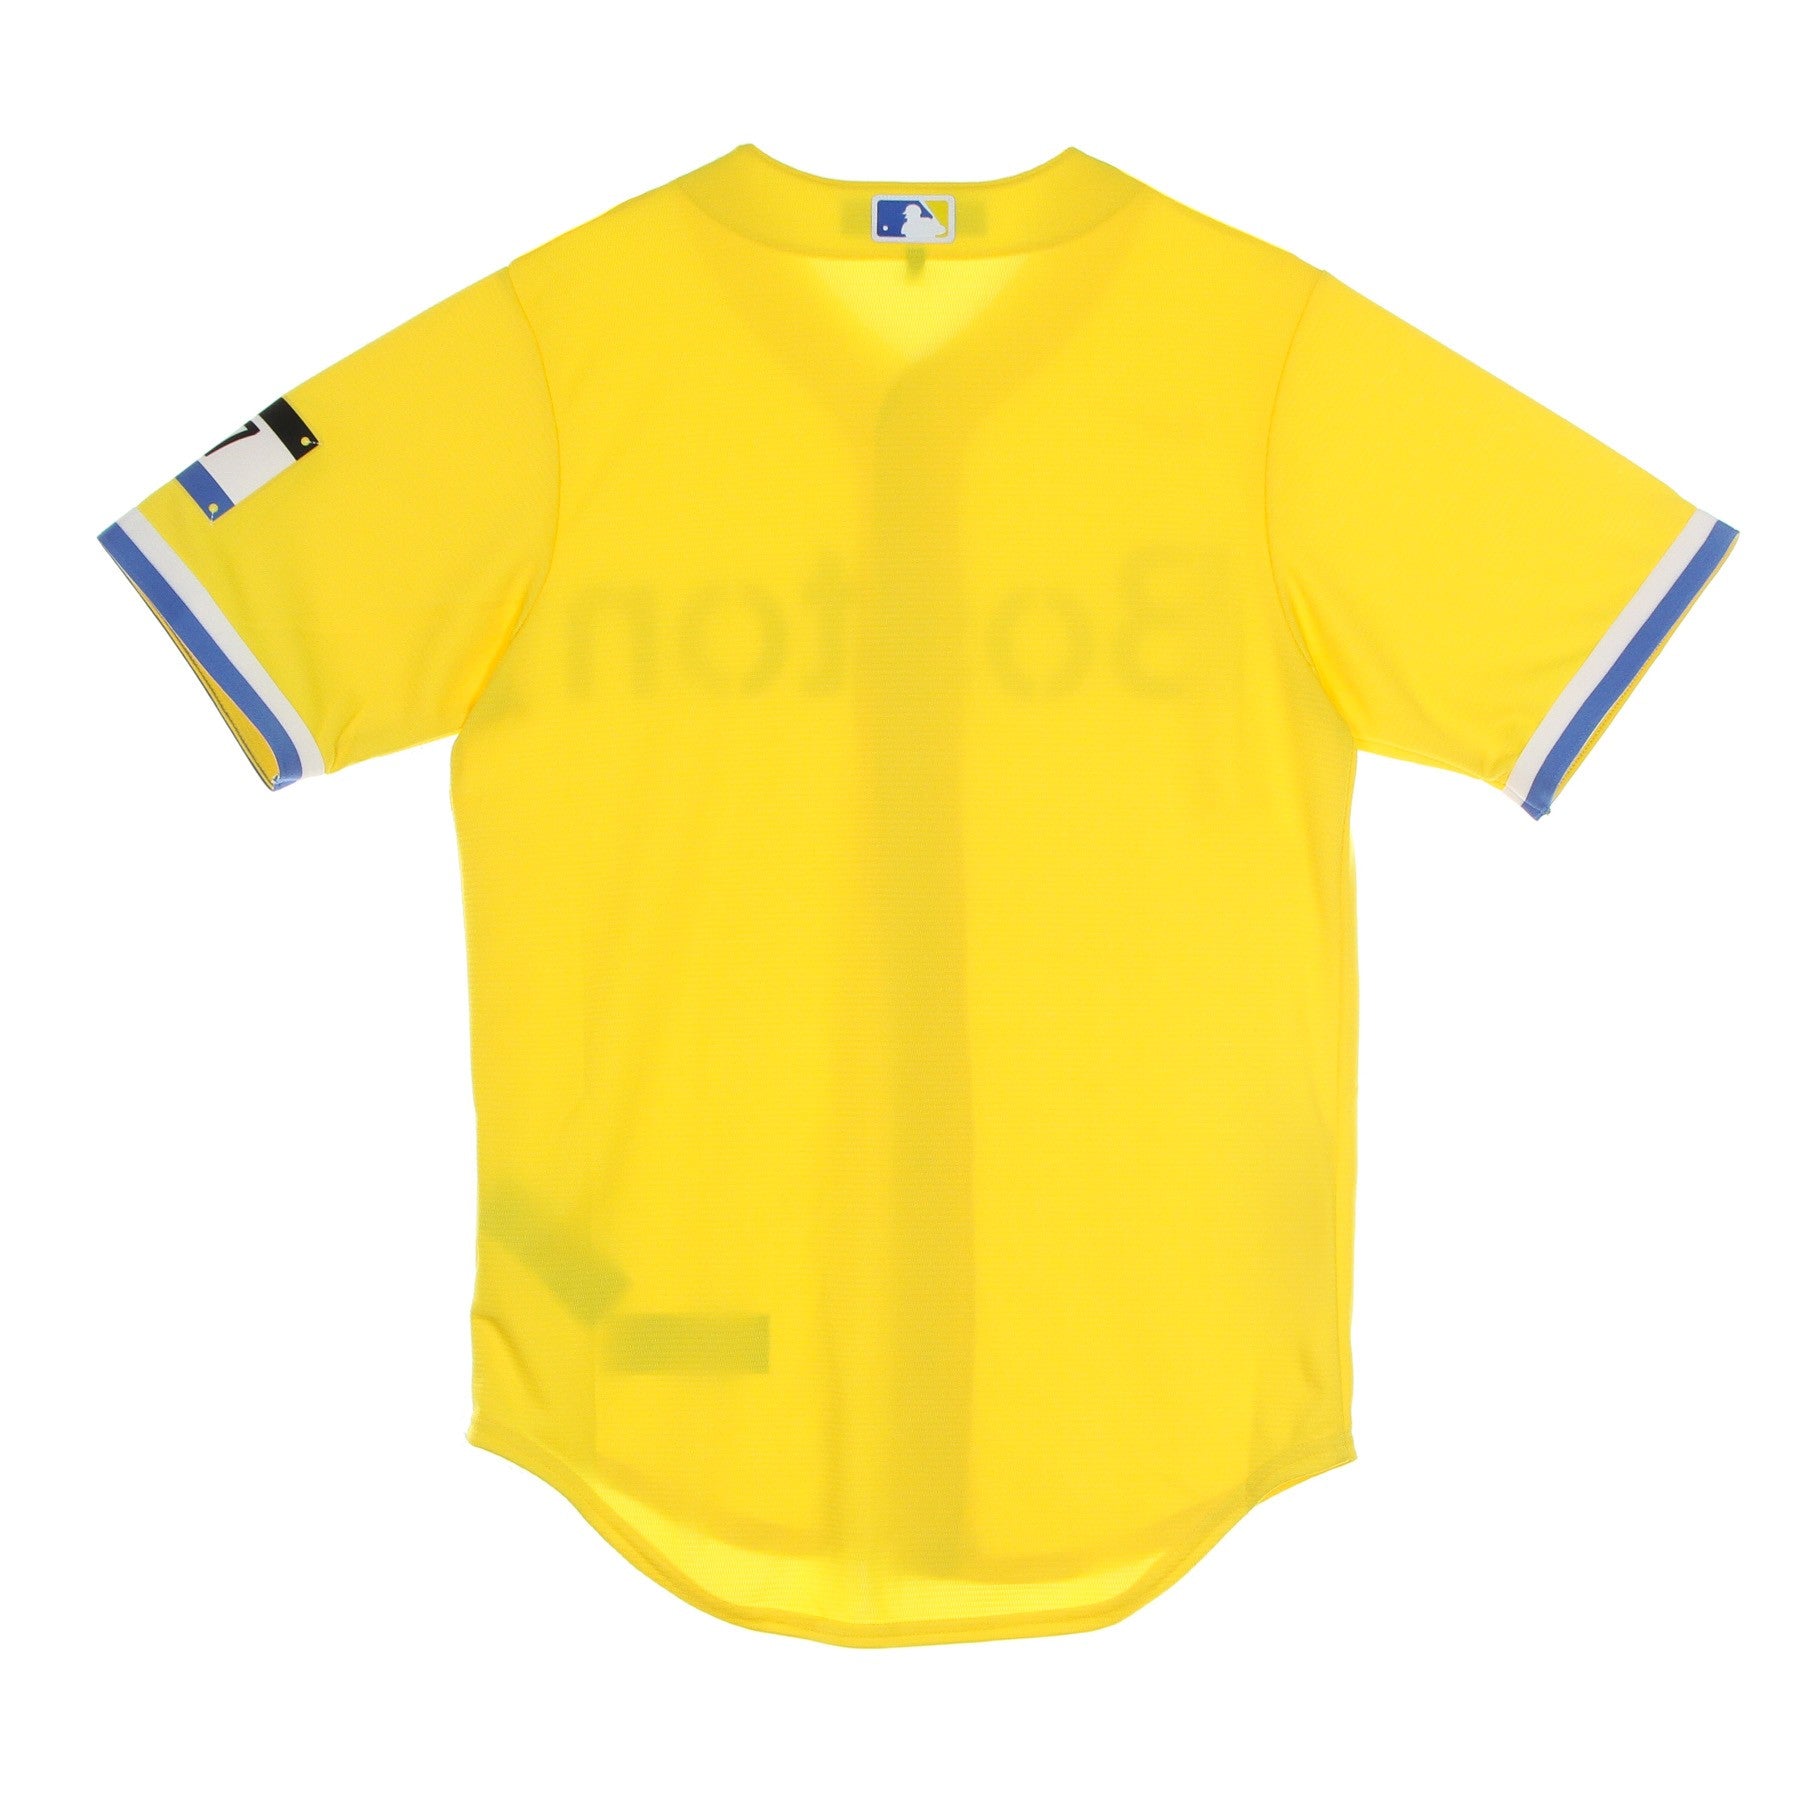 Nike Mlb, Casacca Baseball Uomo Mlb Official Replica Jersey City Connect Bosred, 